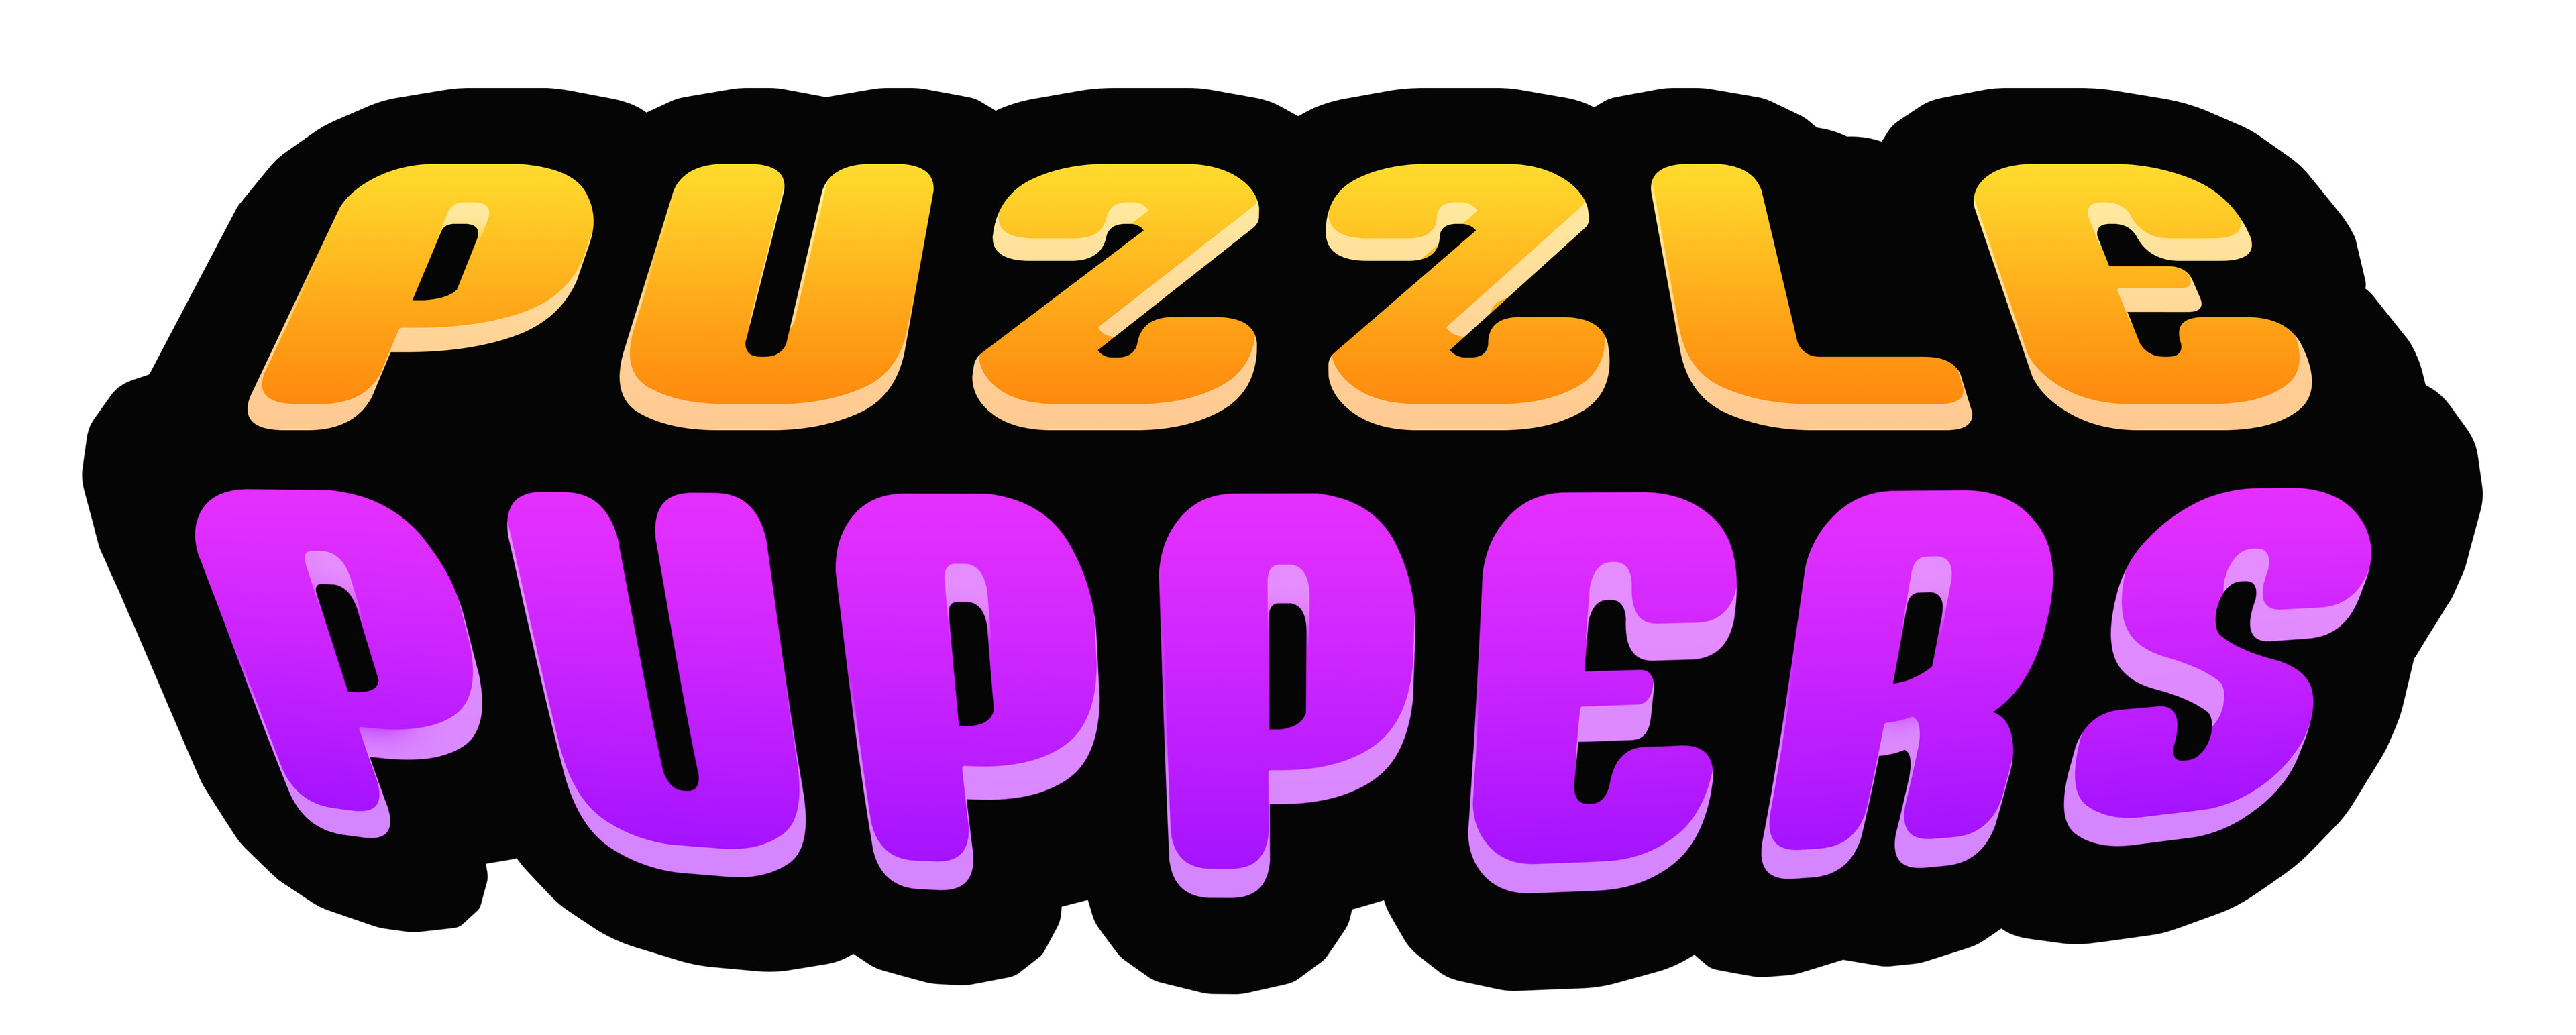 The logo of Puzzle Puppers